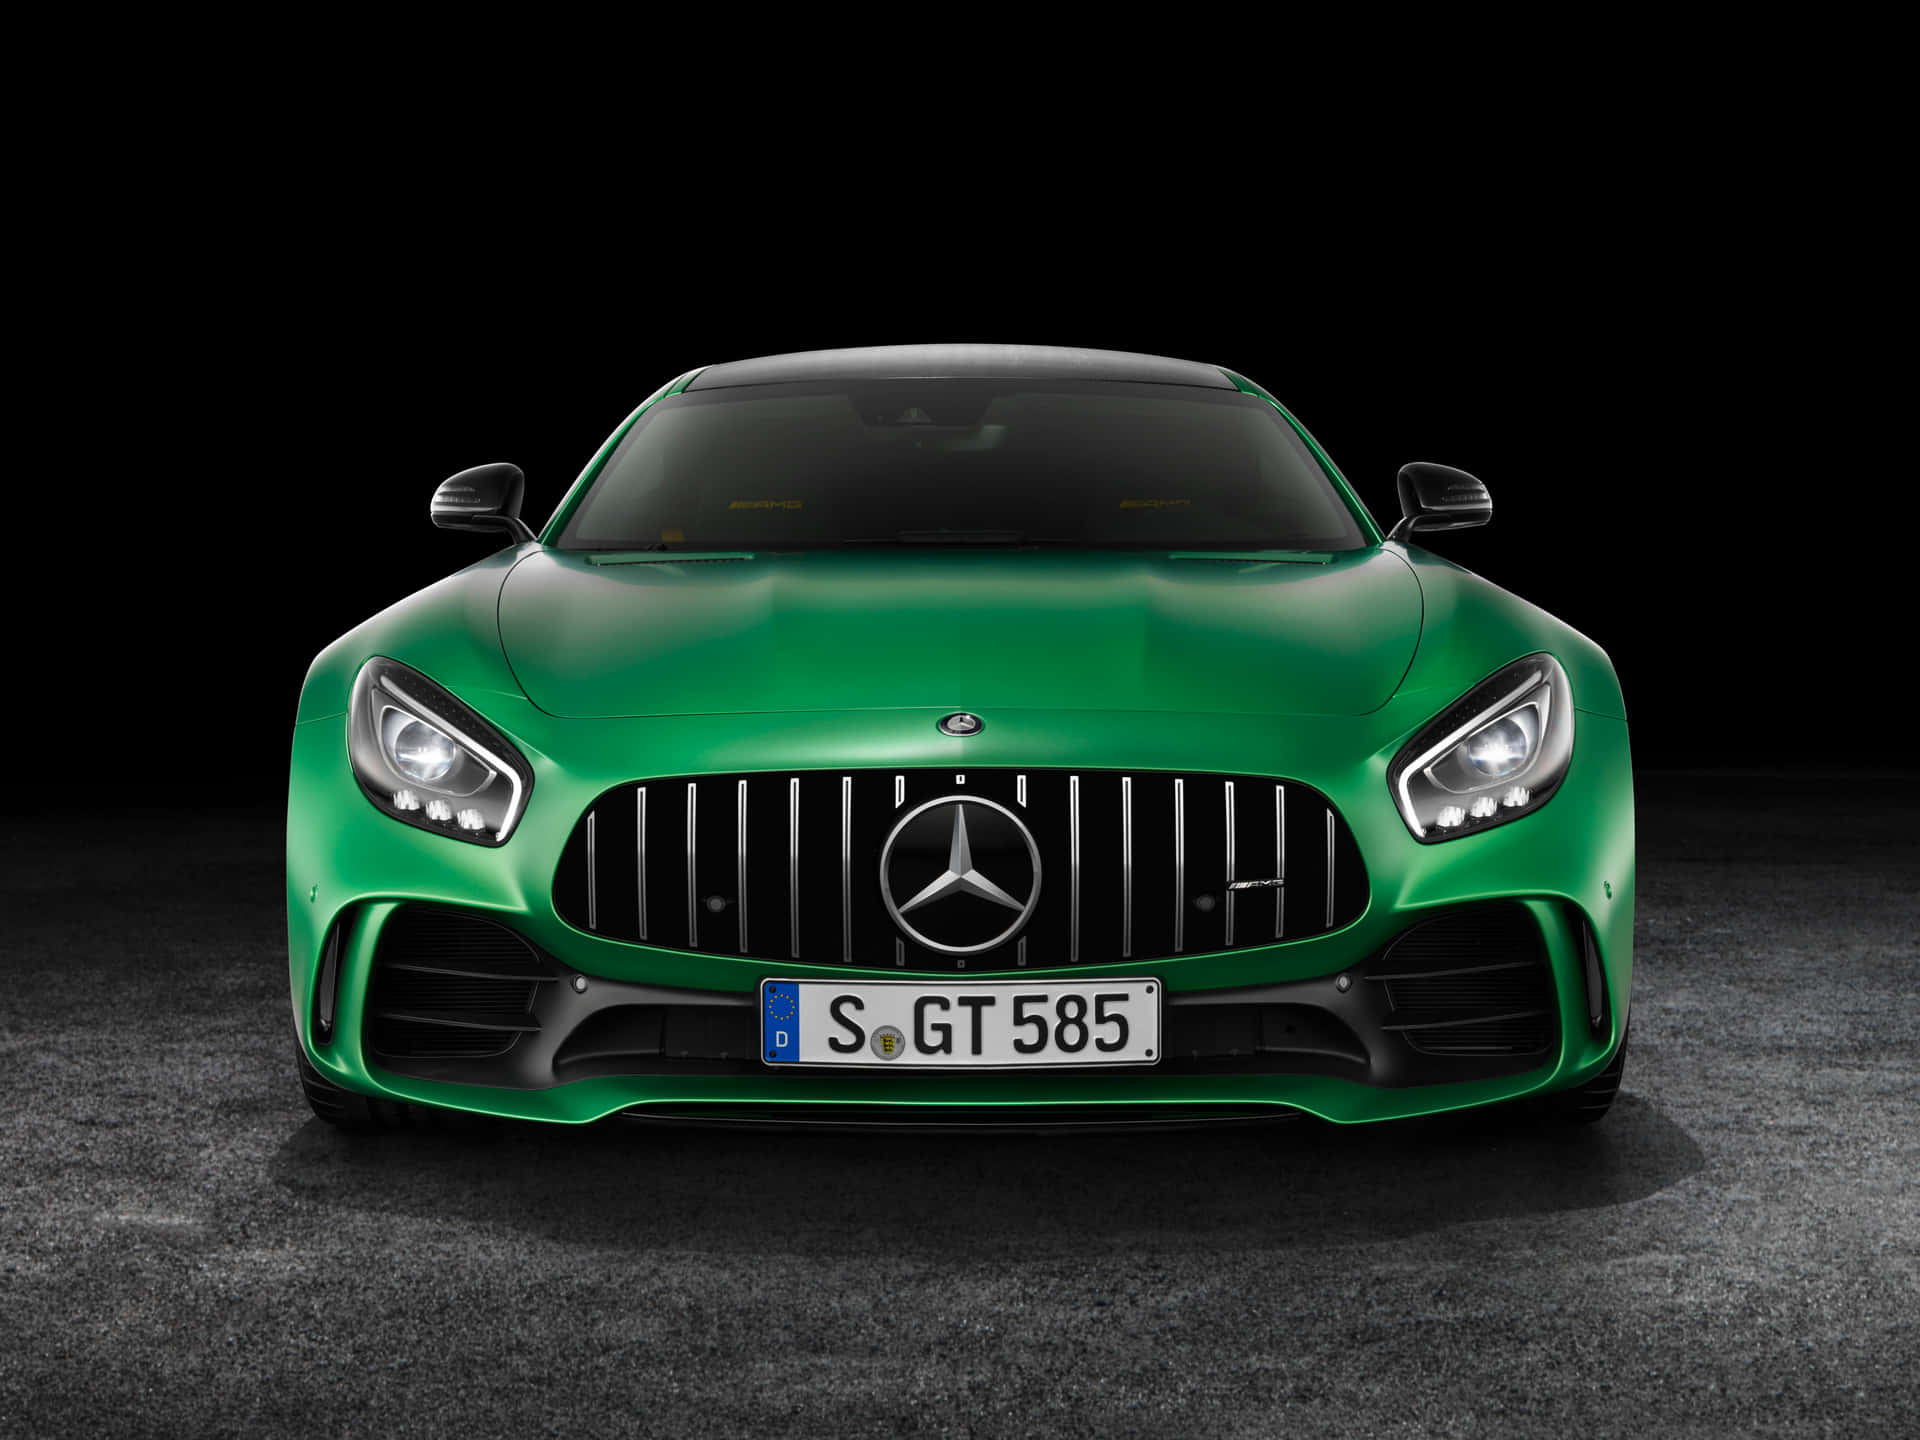 Exemplifying Speed and Power - The alluring AMG GT R in its full glory